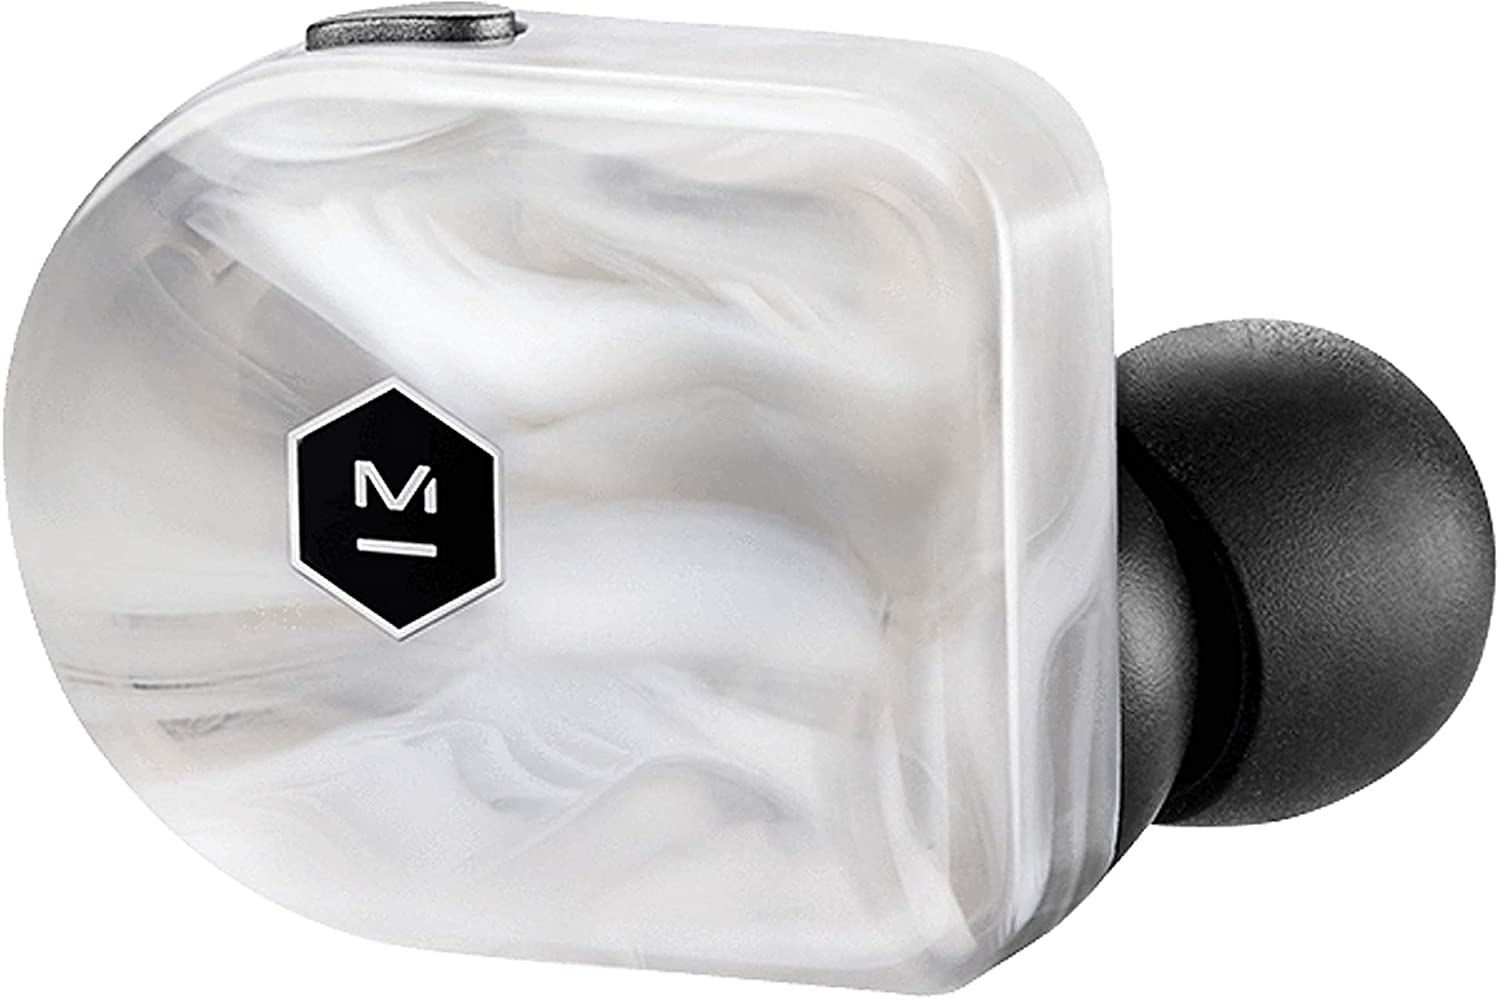 Master &amp; Dynamic MW07 In-Ear True-Wireless Earbuds - White Marble (Refurbished)